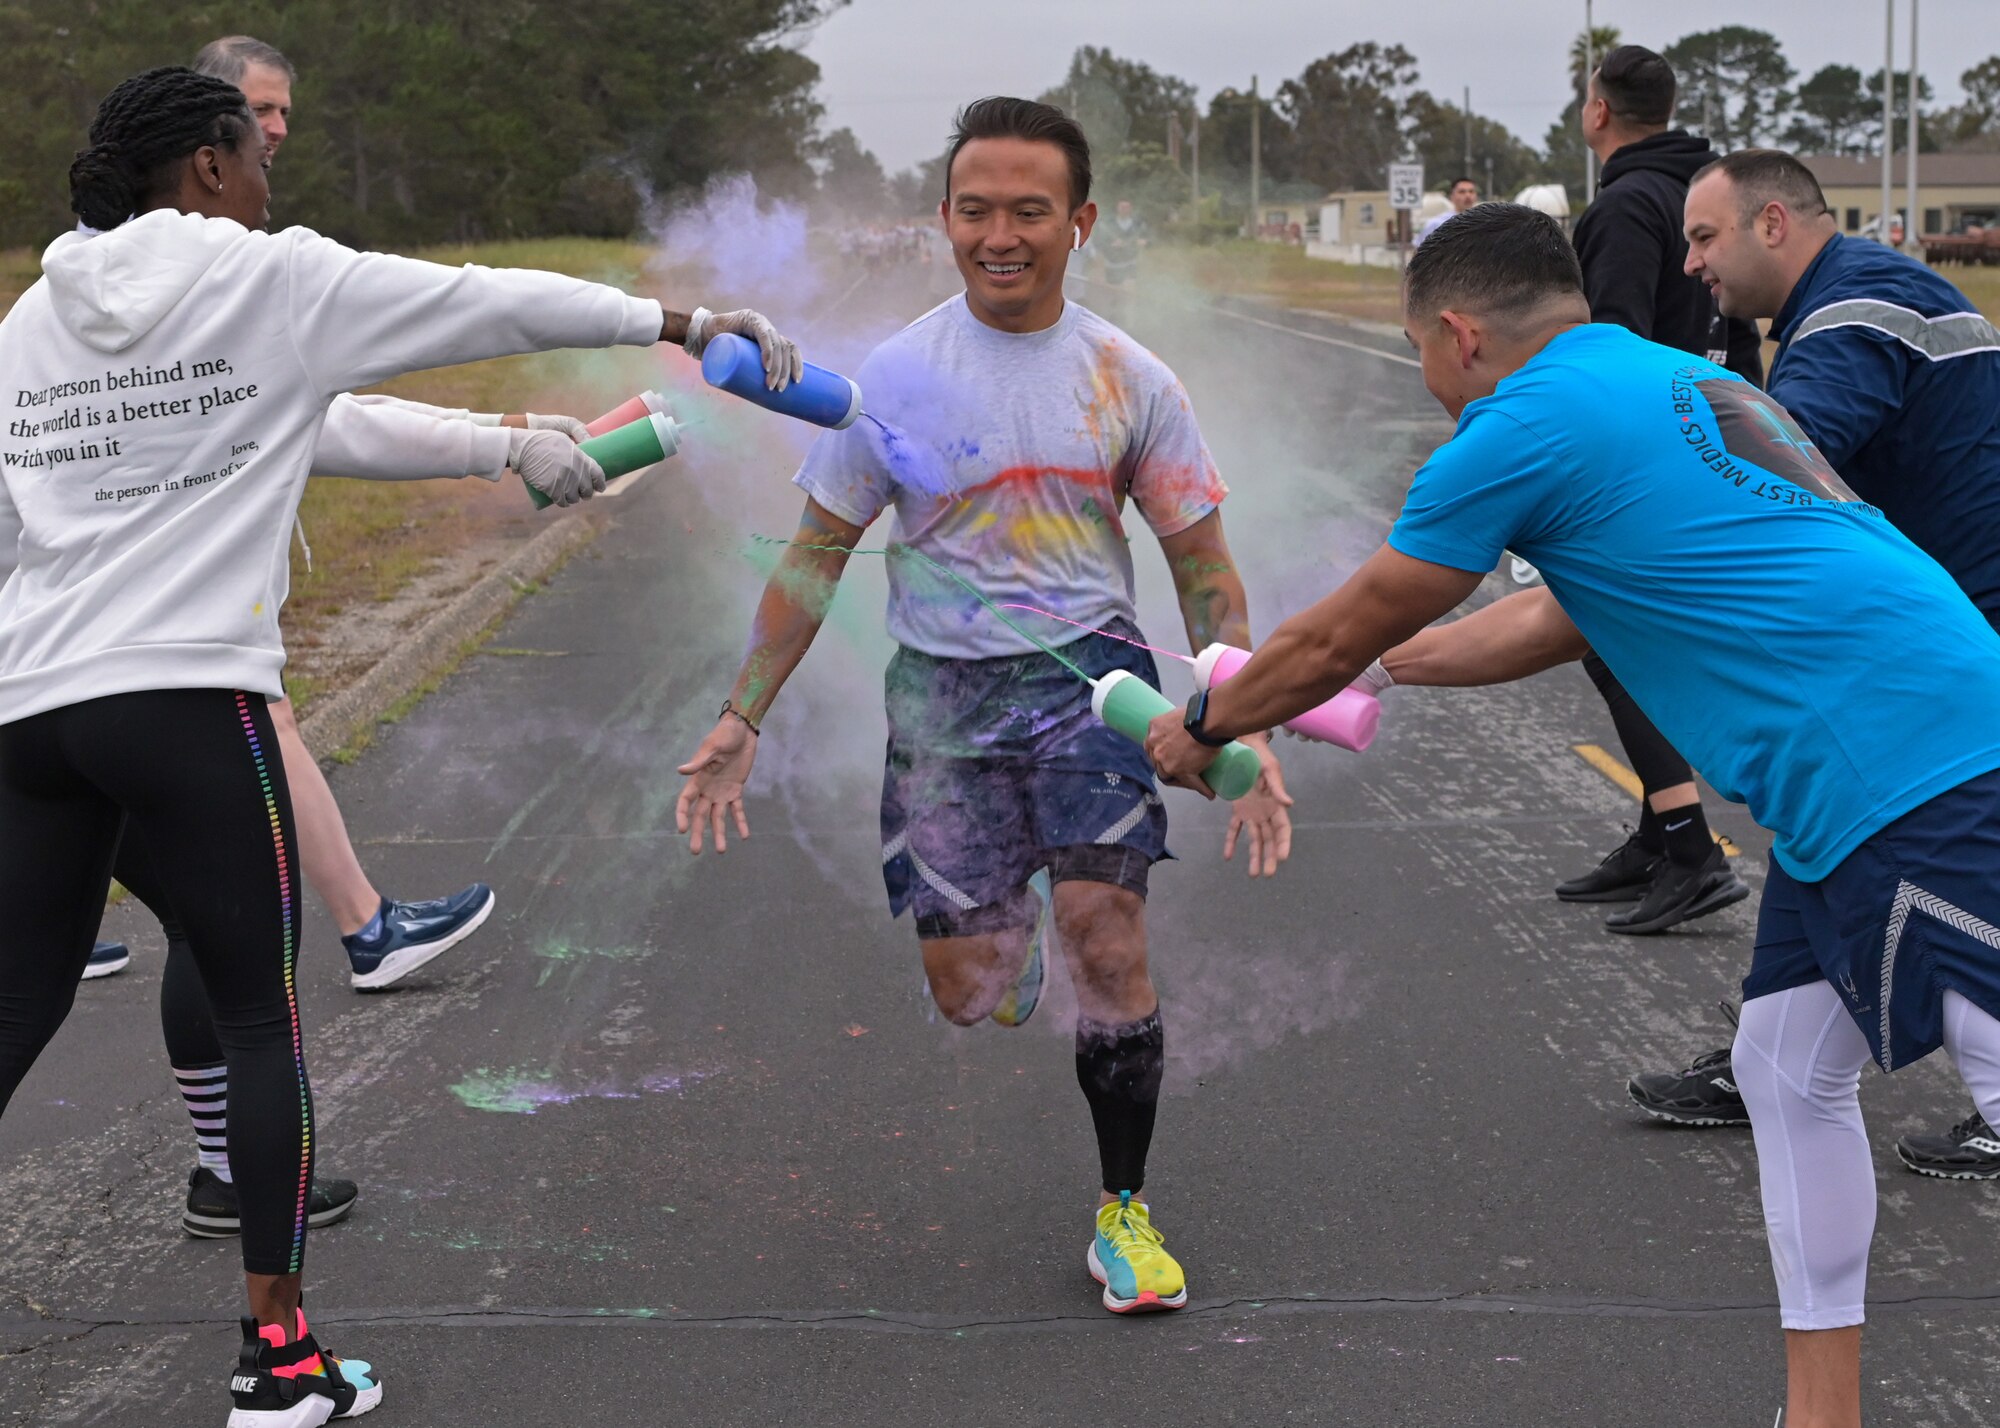 Space Launch Delta 30 members participate in a color run at Vandenberg Space Force Base, Calif., June 2, 2023. During Pride Month, the Department of Defense honors the service, commitment, and sacrifice of the LGBTQ+ Service members and personnel who volunteer to defend our country. (U.S. Space Force photo by Senior Airman Rocio Romo)